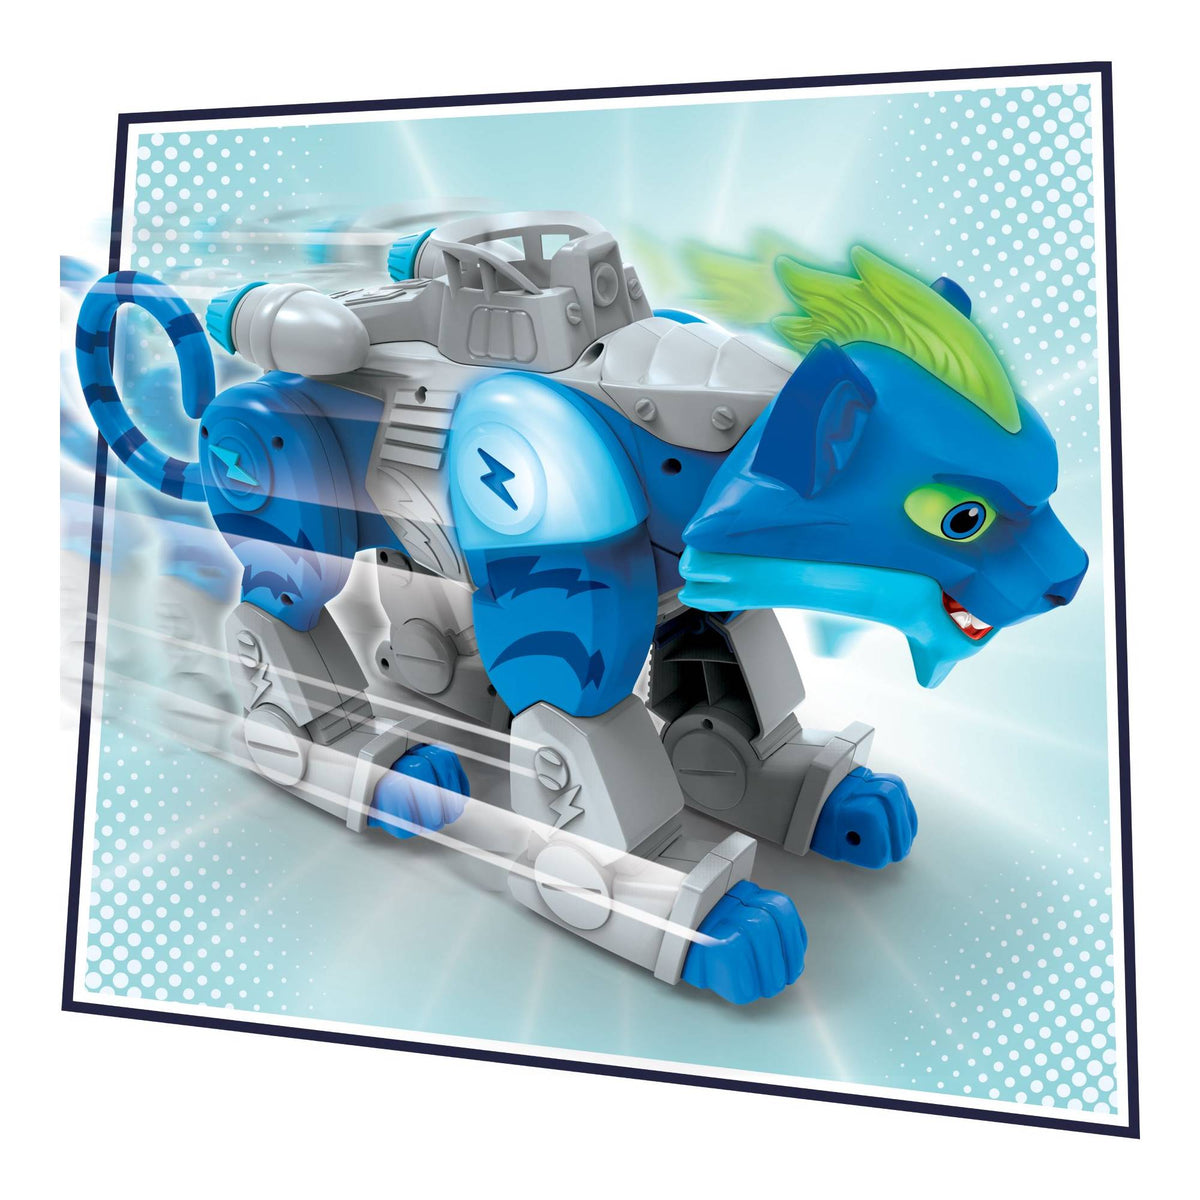 PJMASKS CHARGE AND ROAR POWER CAT